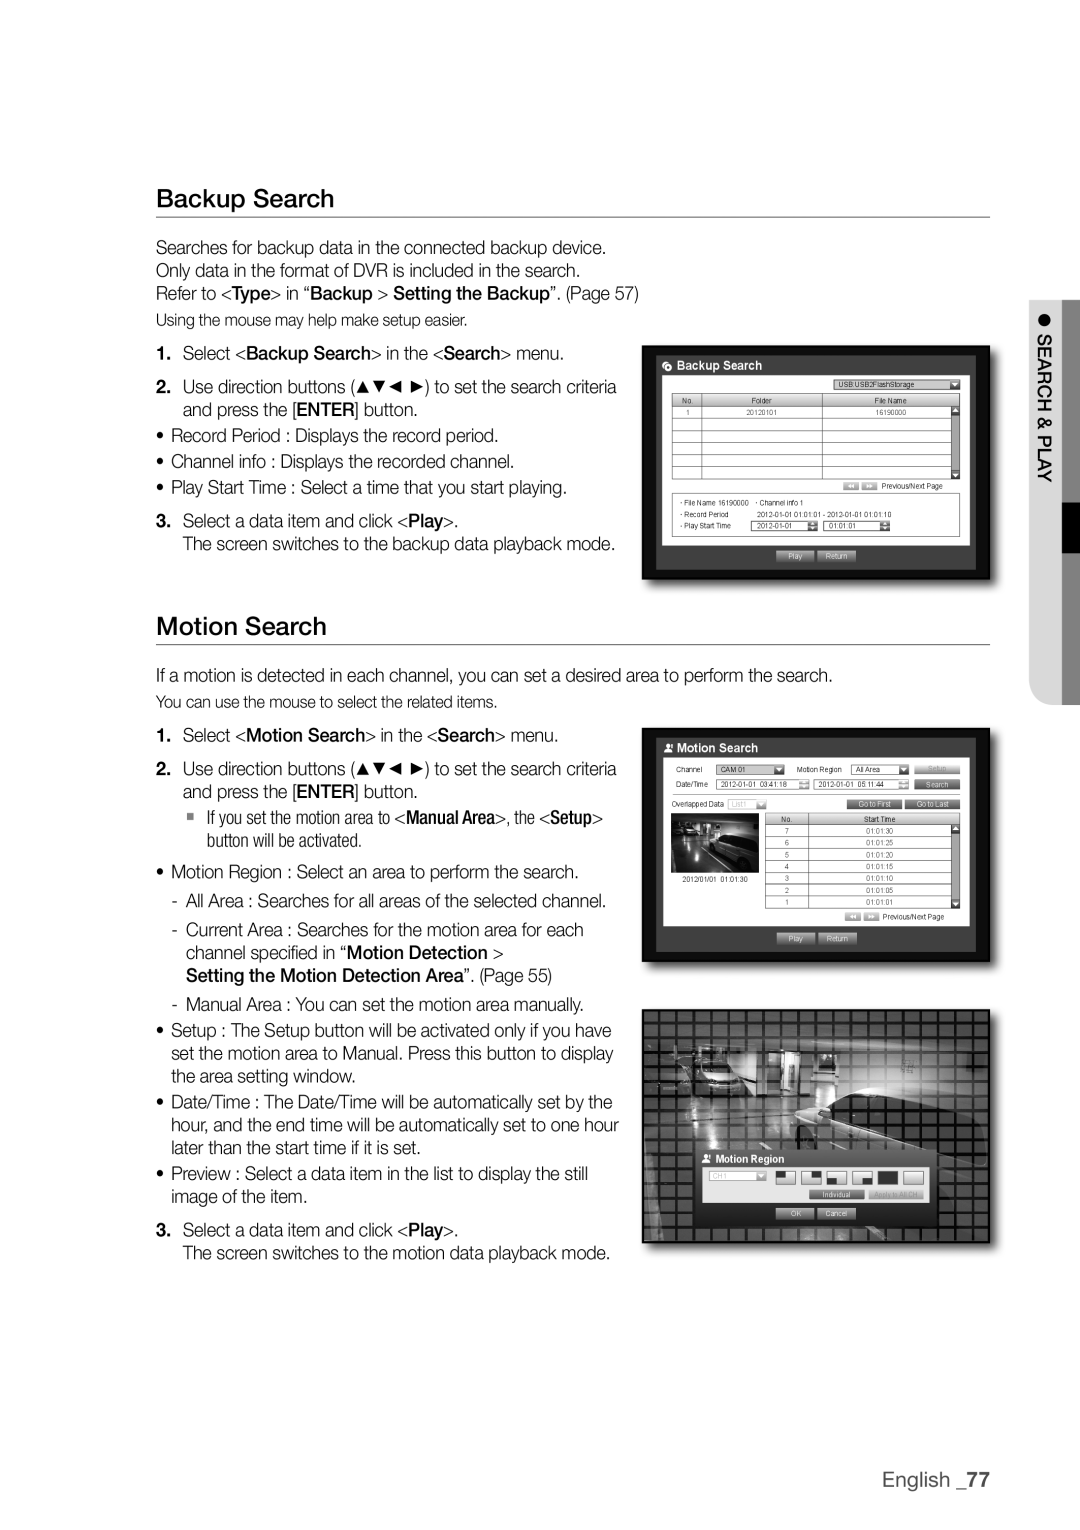 Samsung SDR3100 user manual Backup Search, motion Search, English _77 